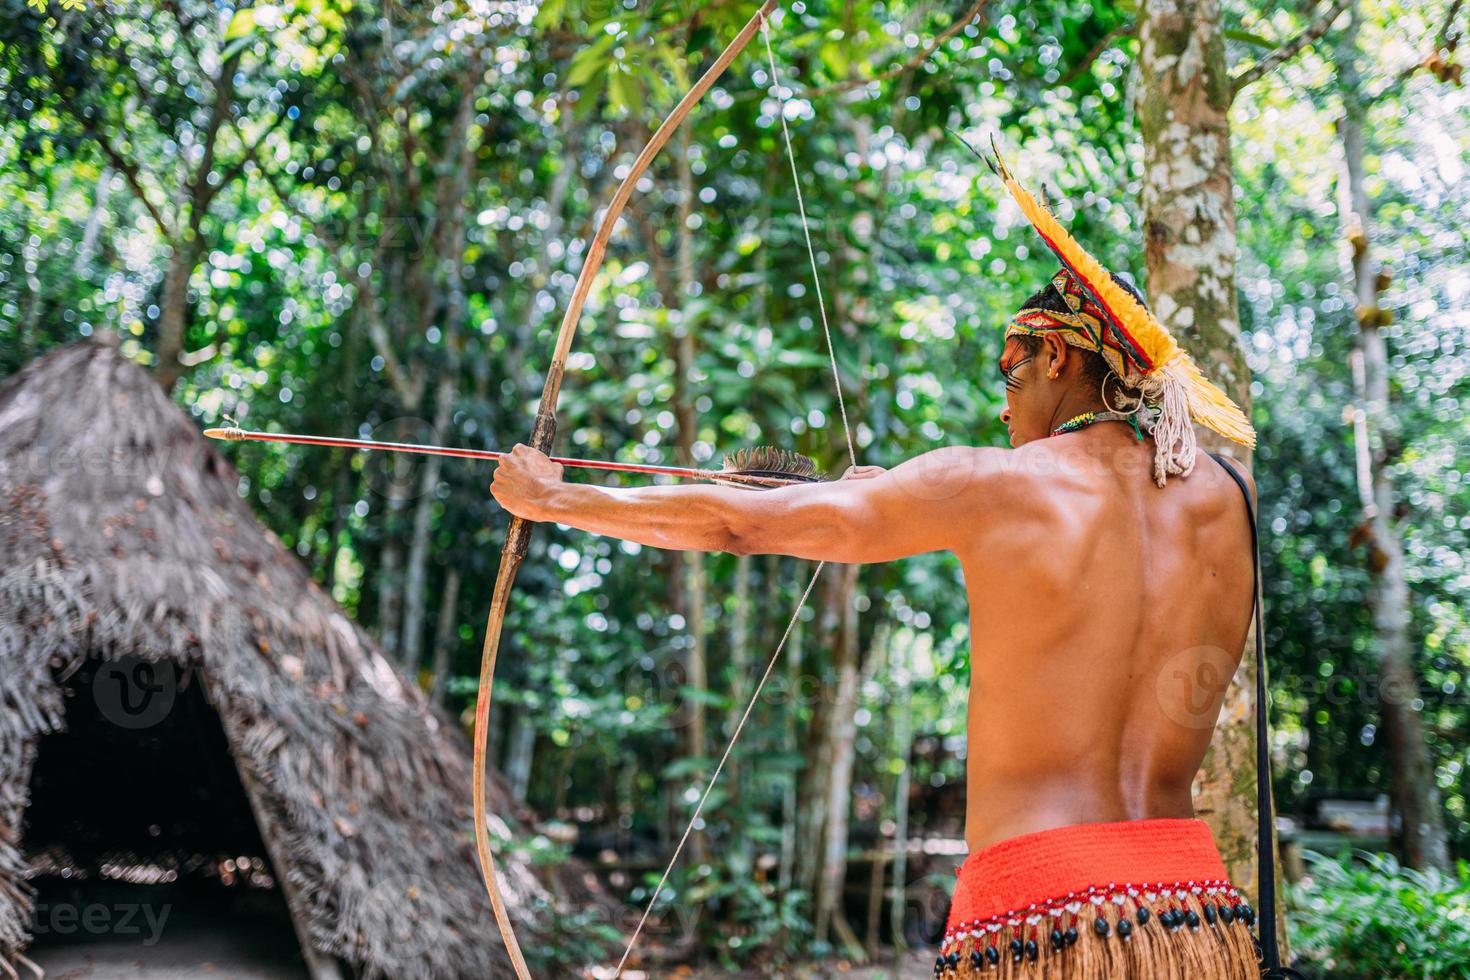 Indian from the Pataxo tribe using a bow and arrow. Brazilian Indian with feather headdress and necklace photo